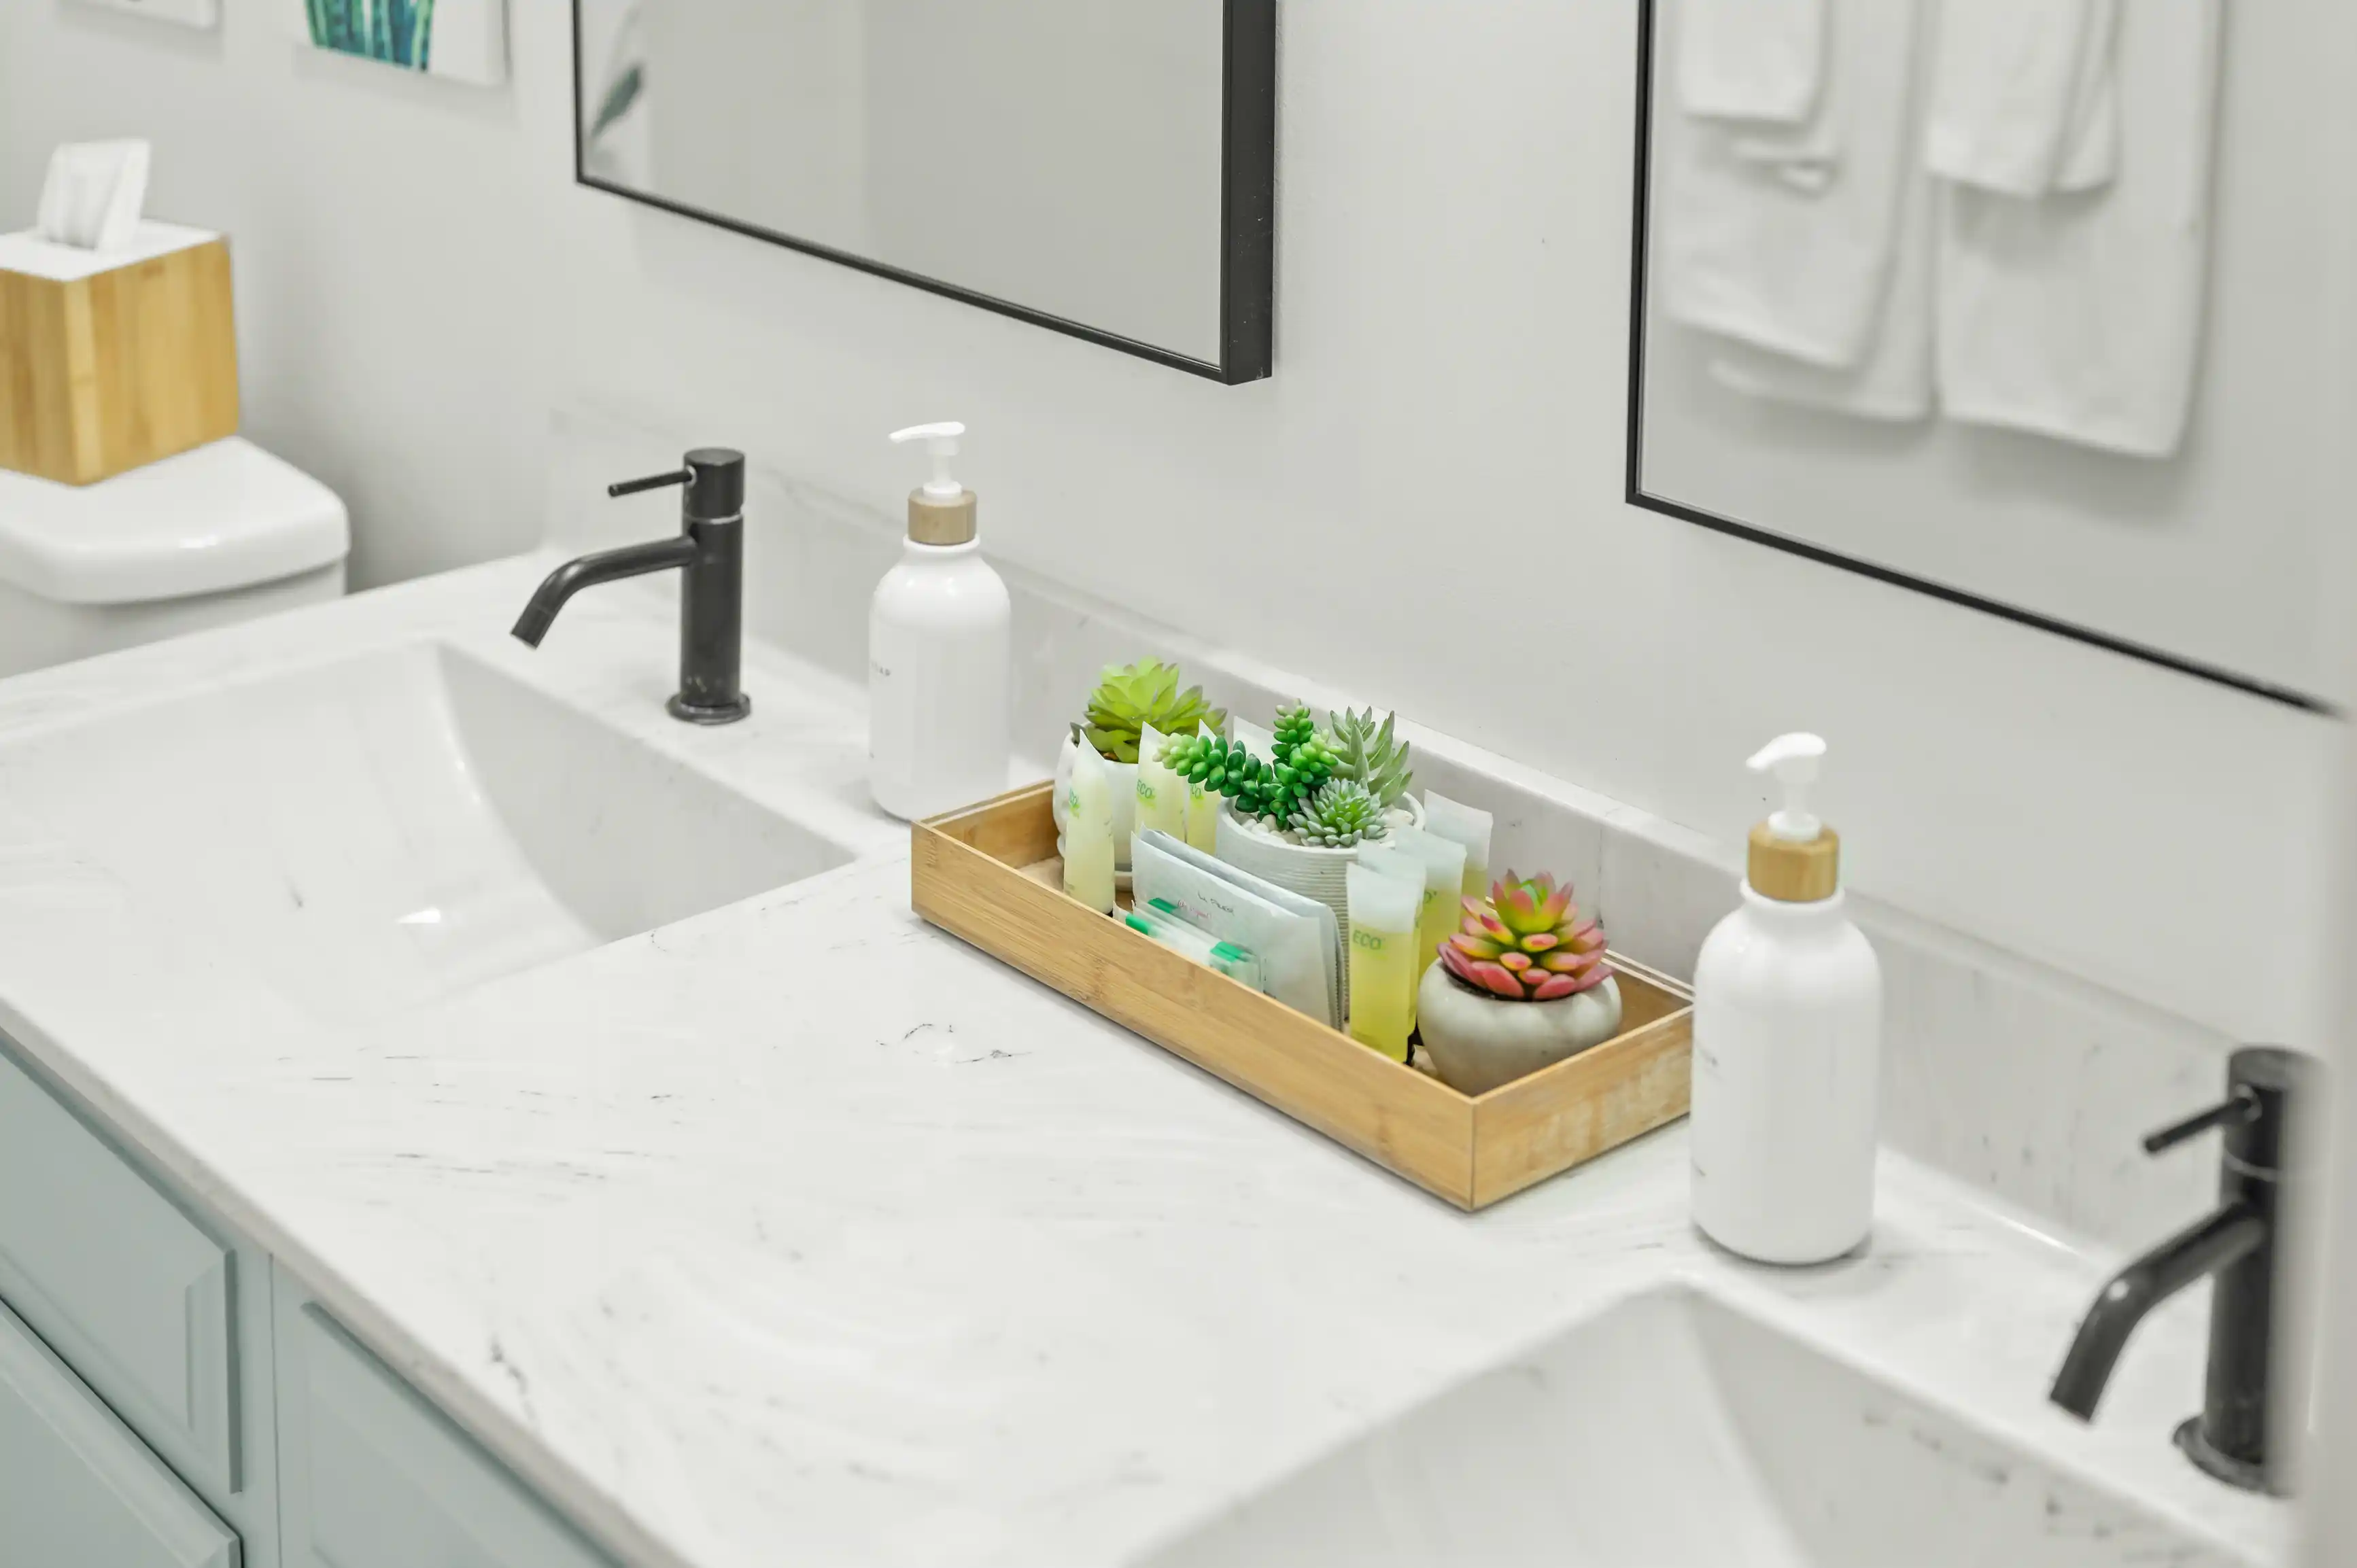 Modern bathroom interior with marble countertop and sink, black faucet, and various toiletries and plants arranged in a wooden tray.